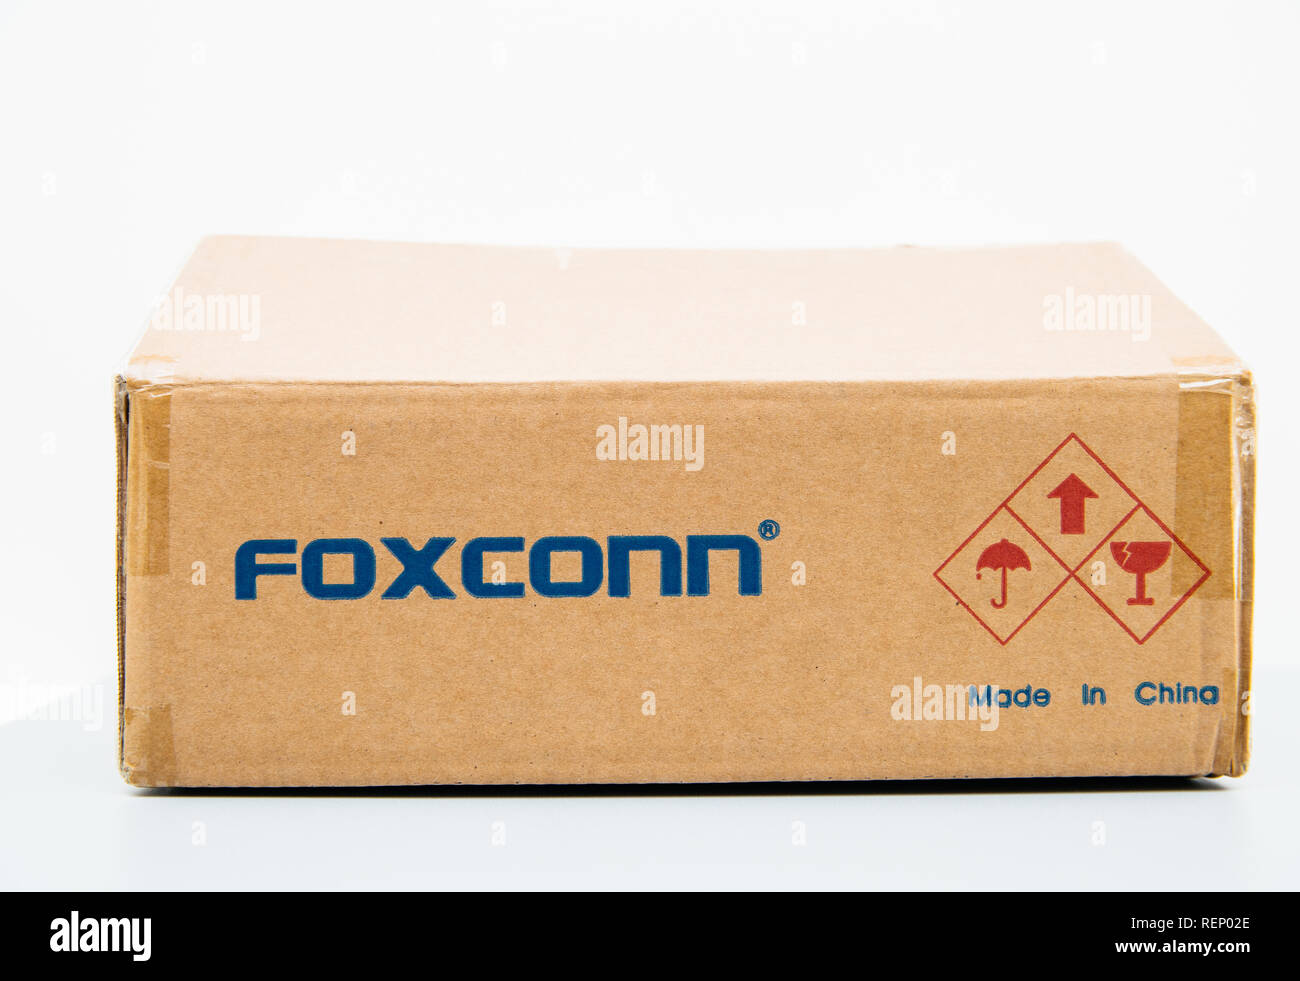 LONDON, UNITED KINGDOM - AUG 23, 2018: Unboxing Front view of Foxconn cardboard delivery box with logotype on against white background containing spare parts for computers laptop and technology part - mae in china sign Stock Photo